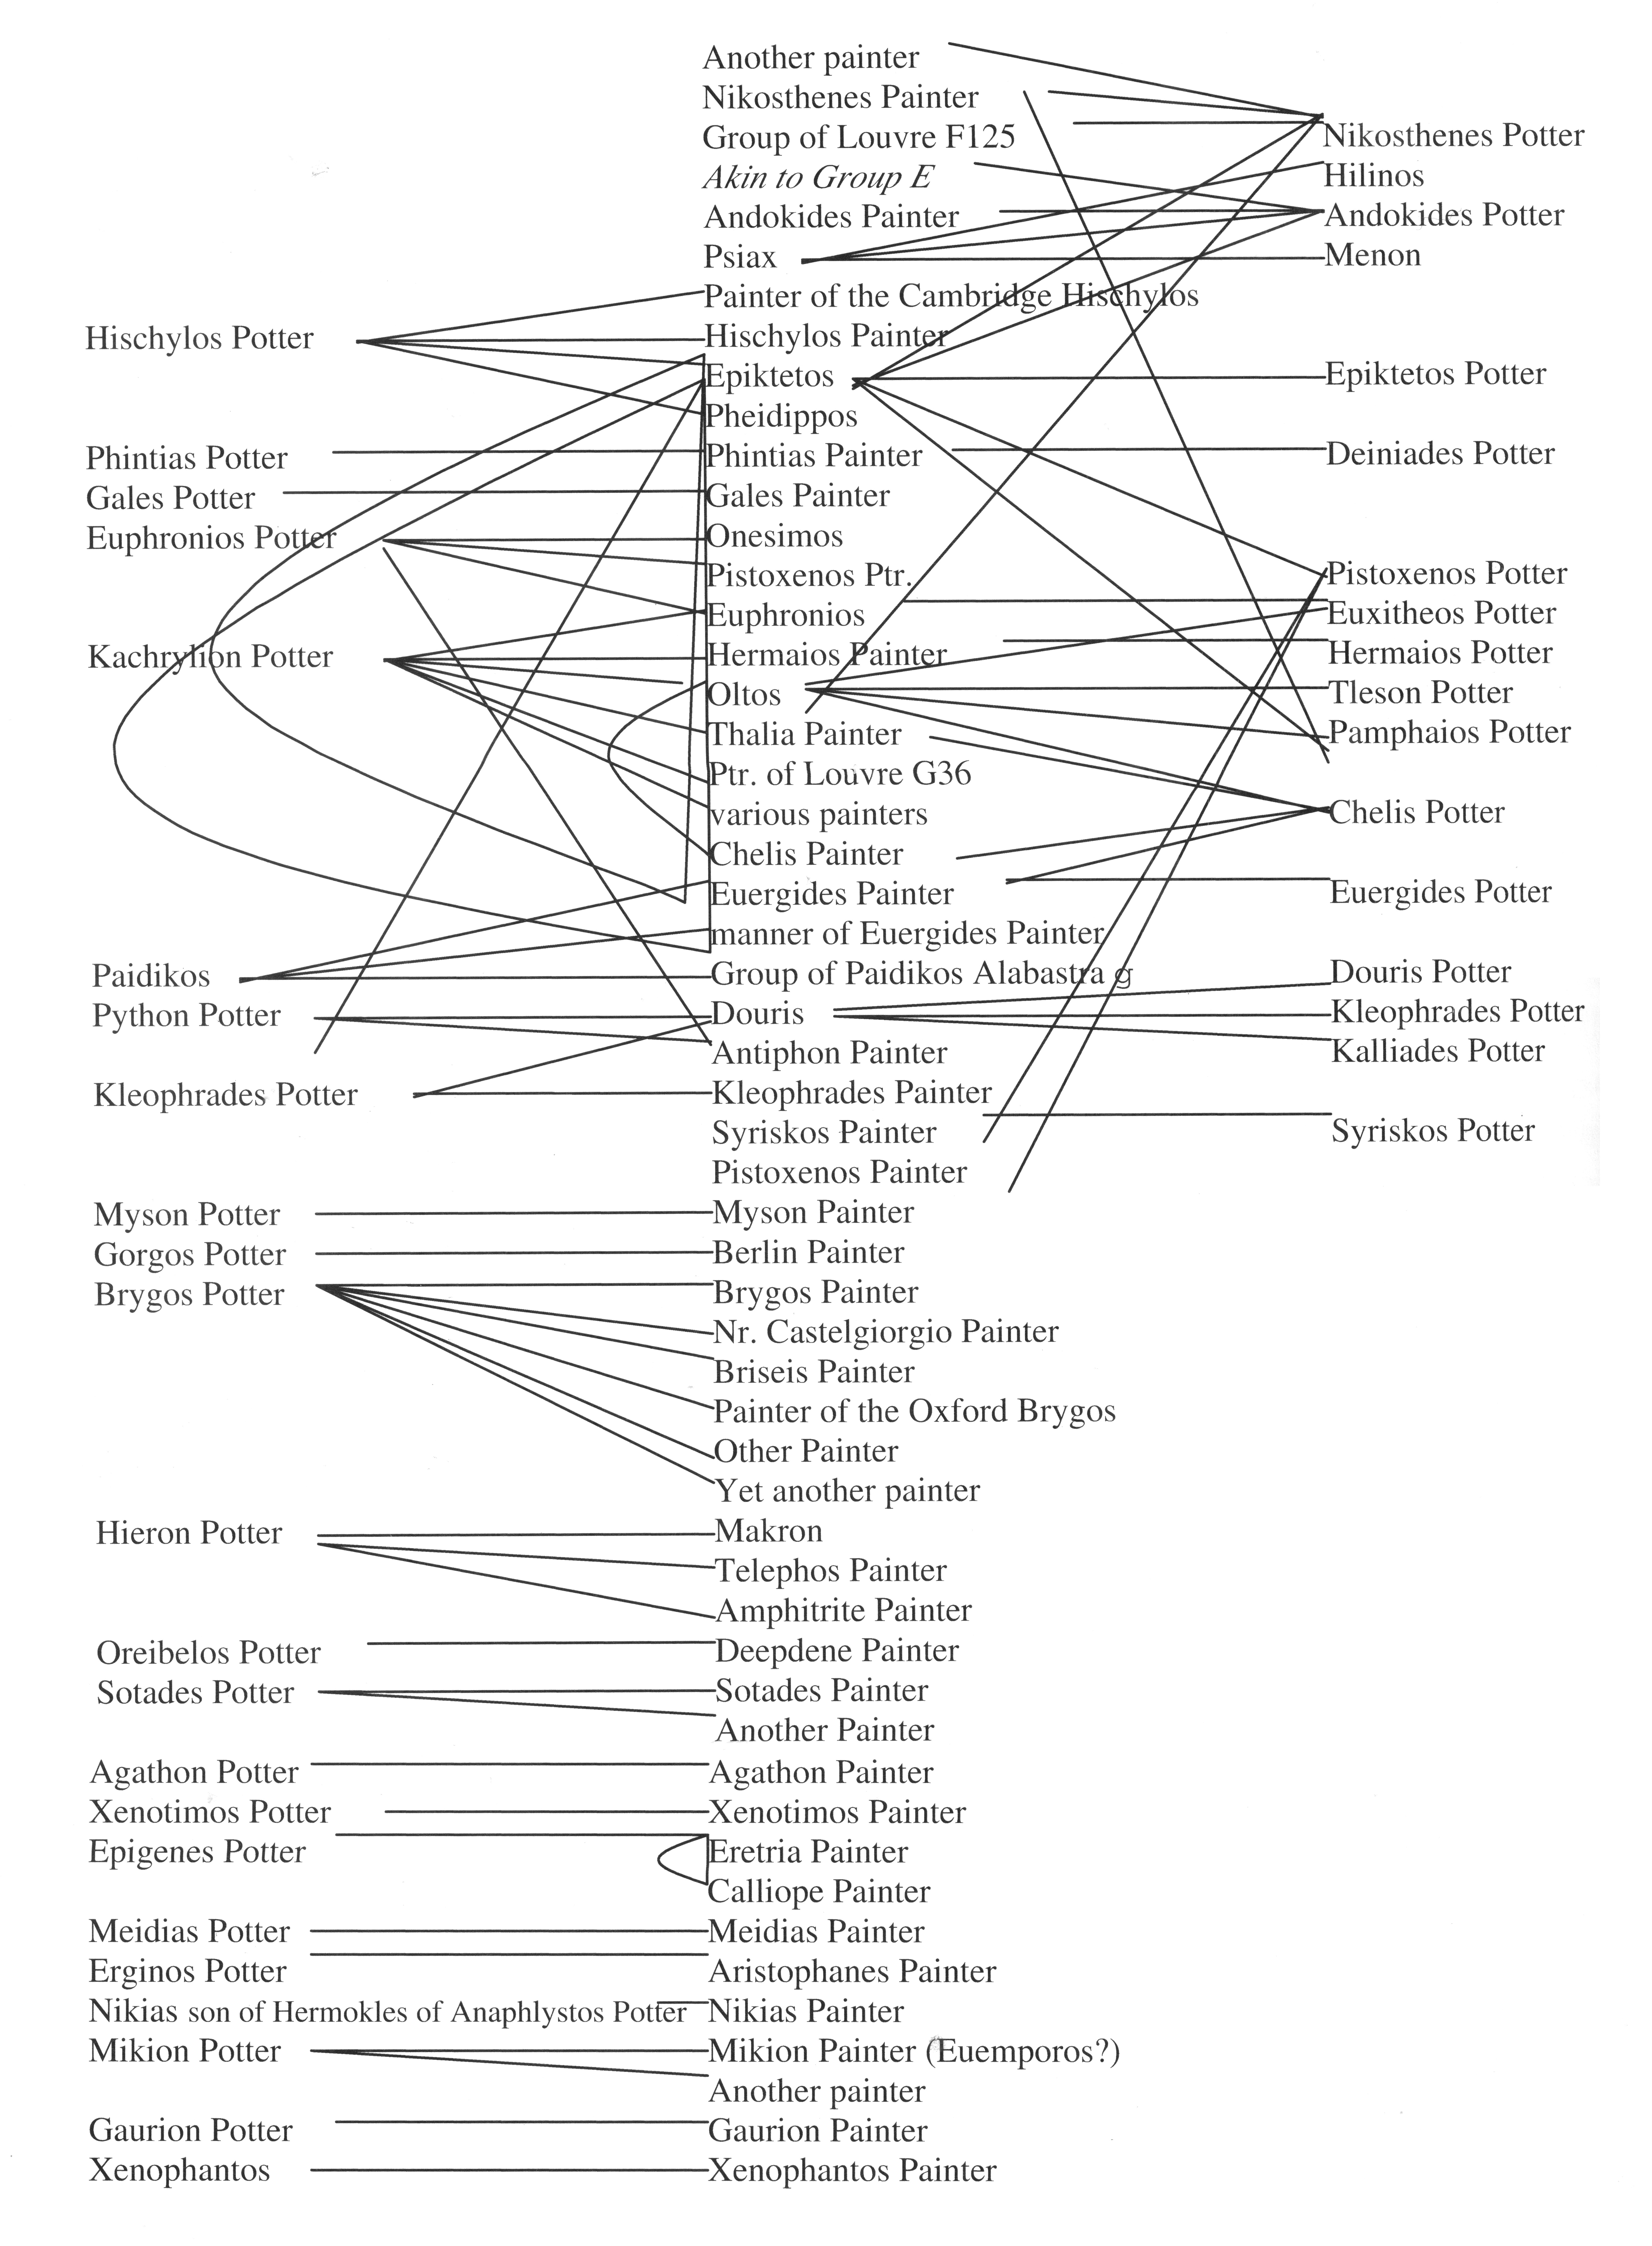 Figure 1: Wire diagram of collaborations among Athenian red-figure potters and painters (Osborne 2004: 90 fig. 6.8).